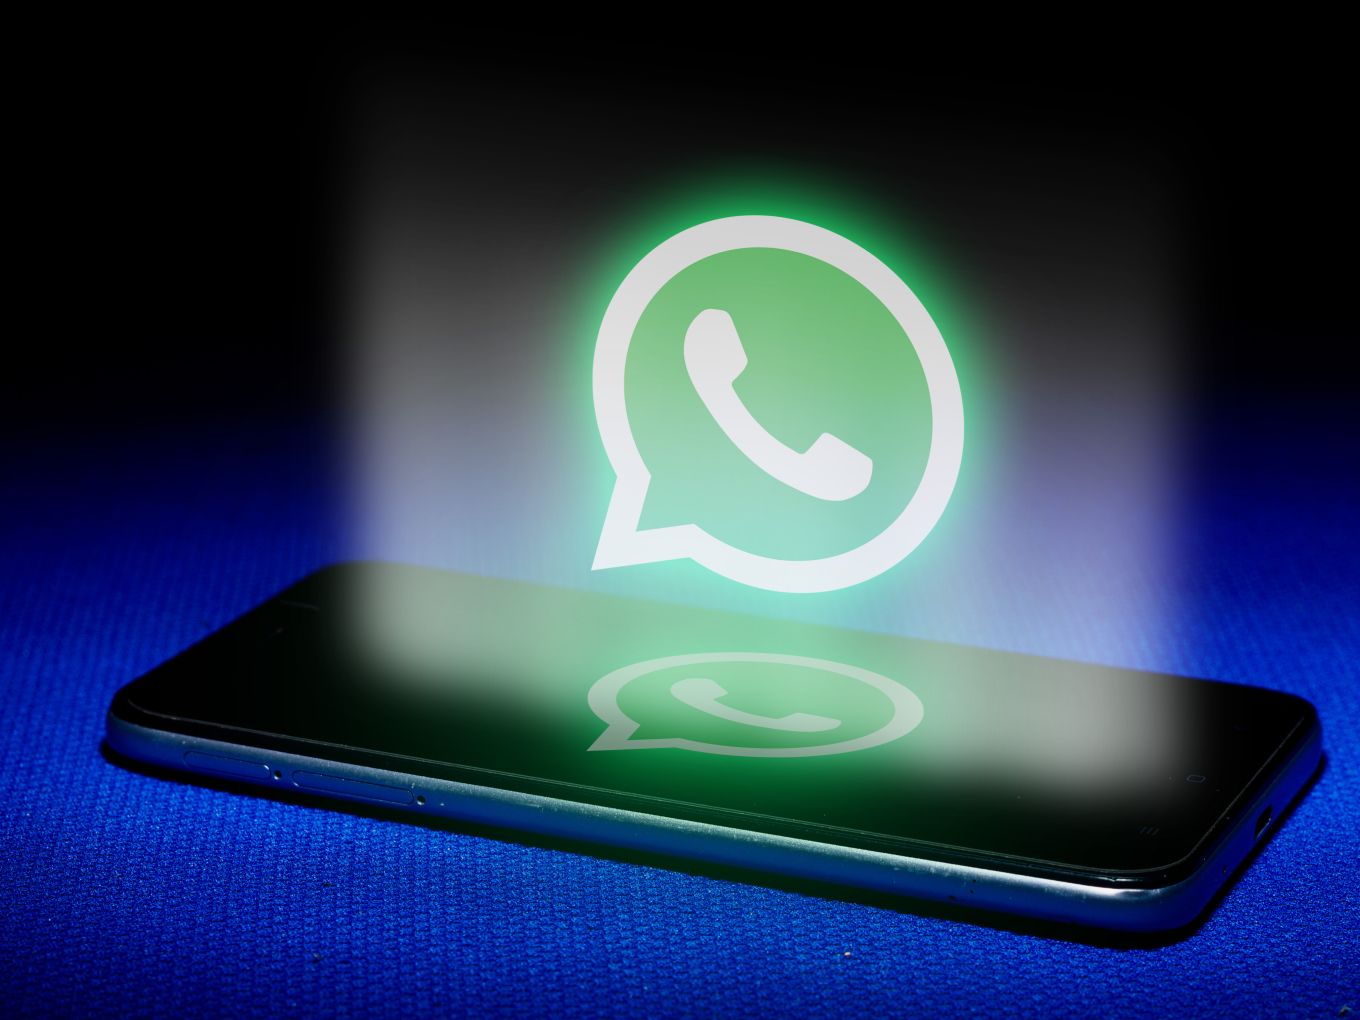 Apple To Restrict Facebook, WhatsApp Voice Calls To Block Data Access